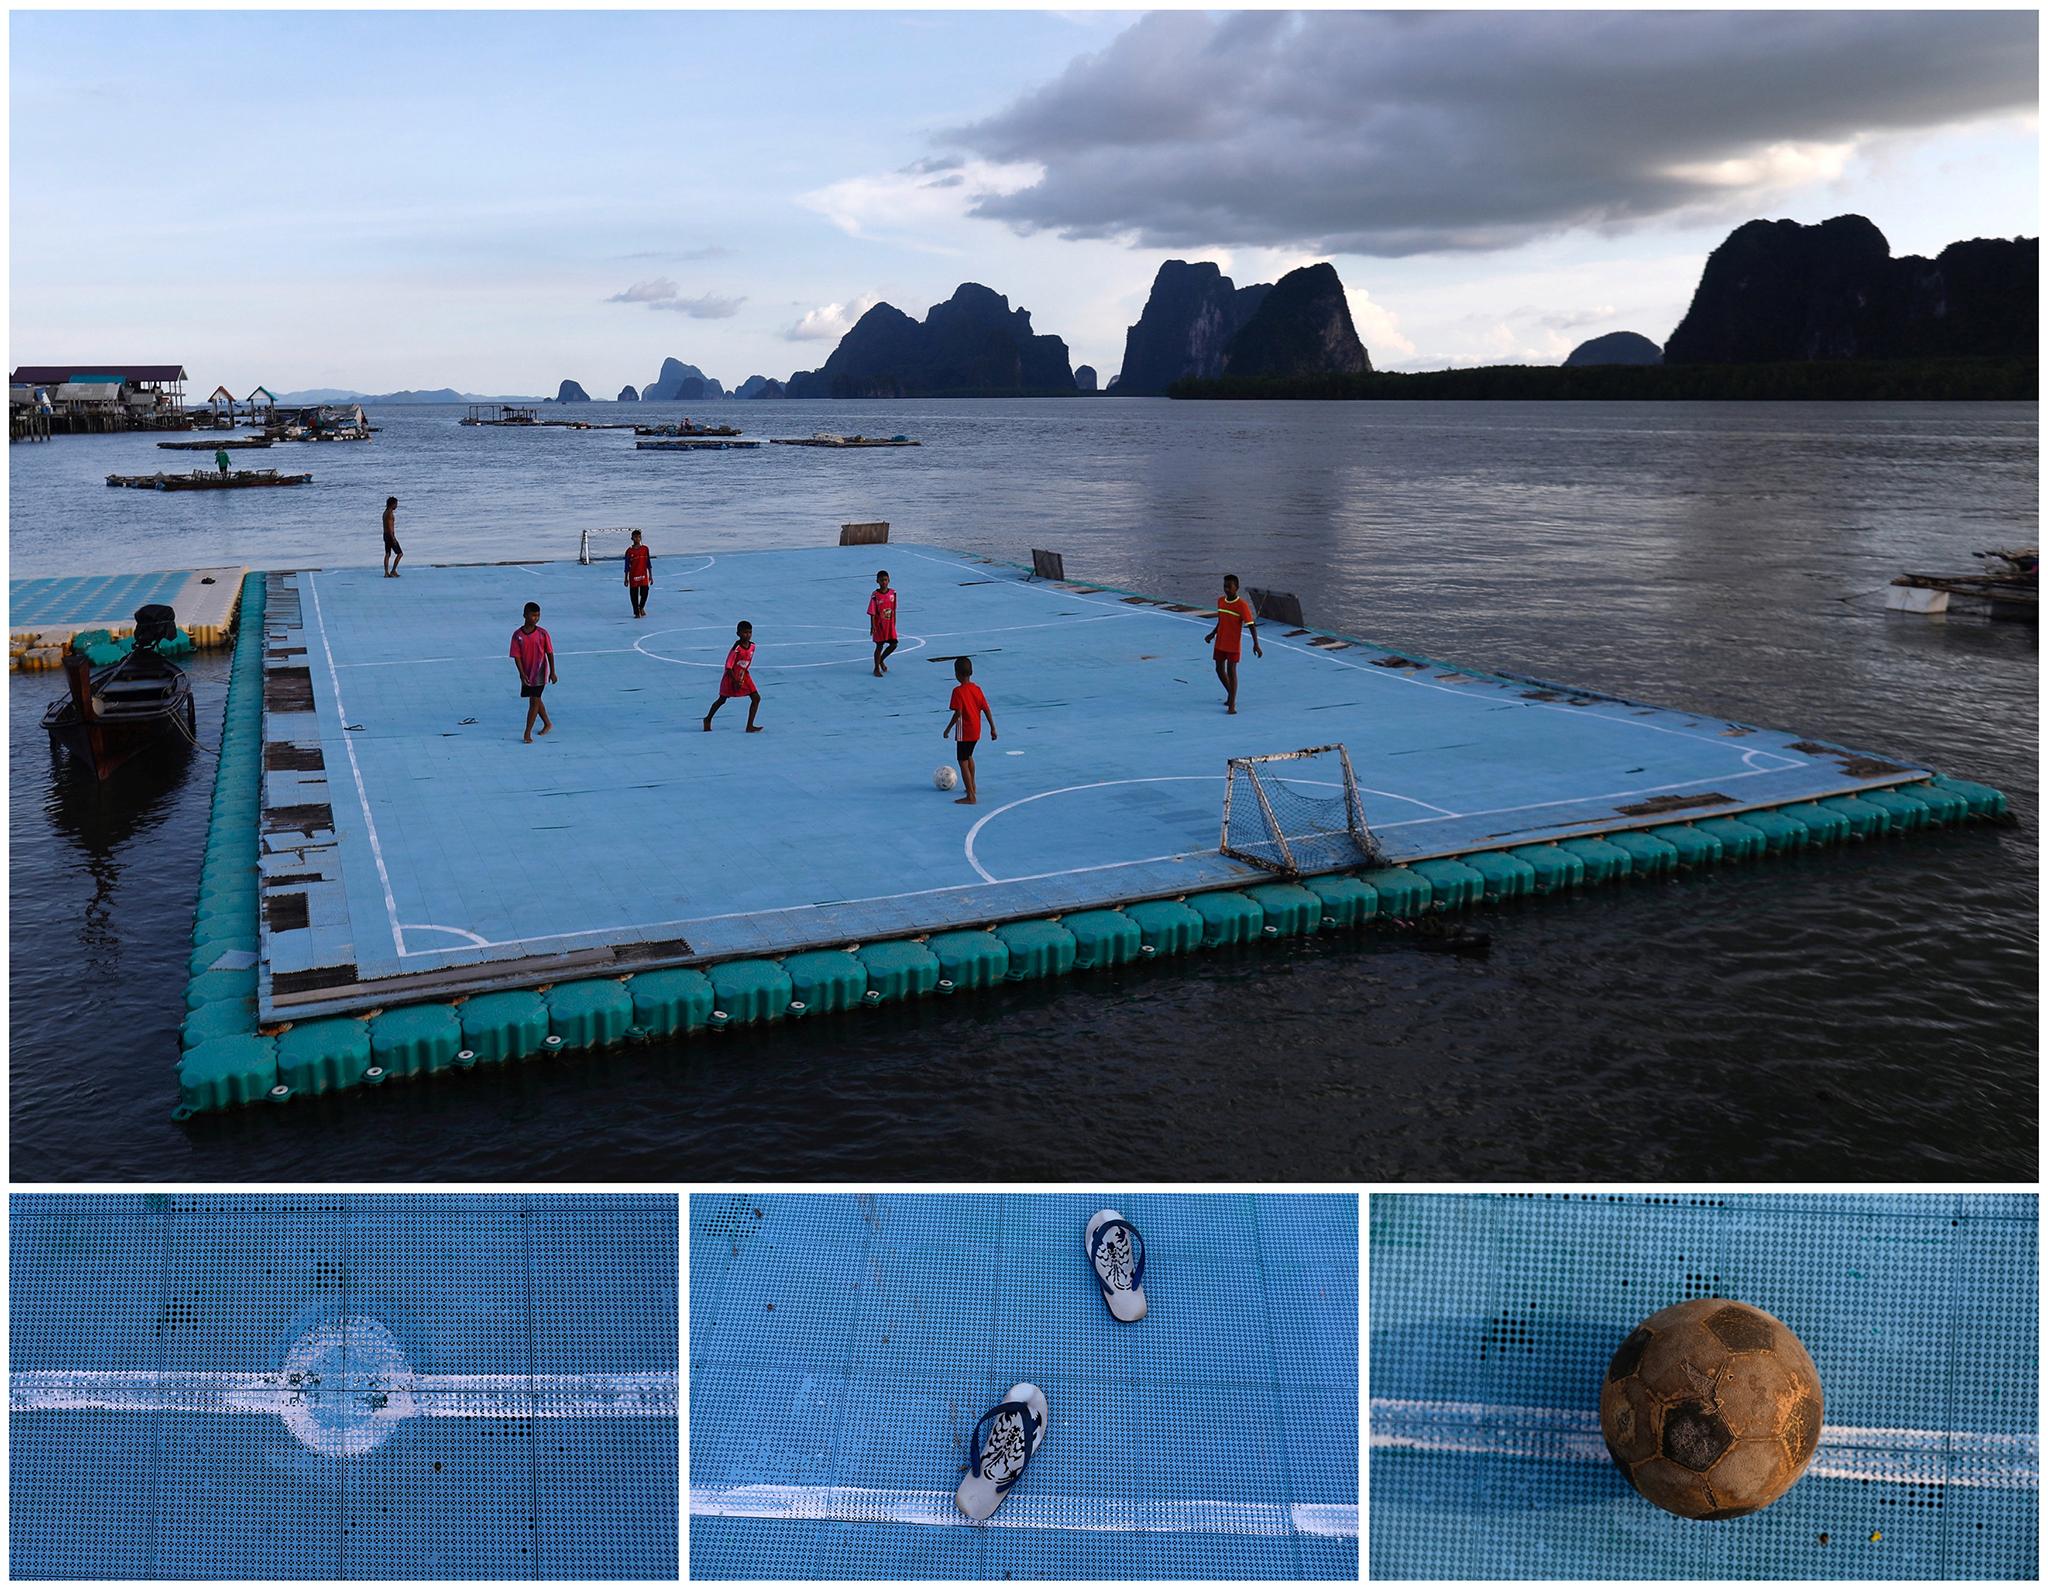 Children playing football on a floating pitch in the fishing village of Ko Panyi, Thailand